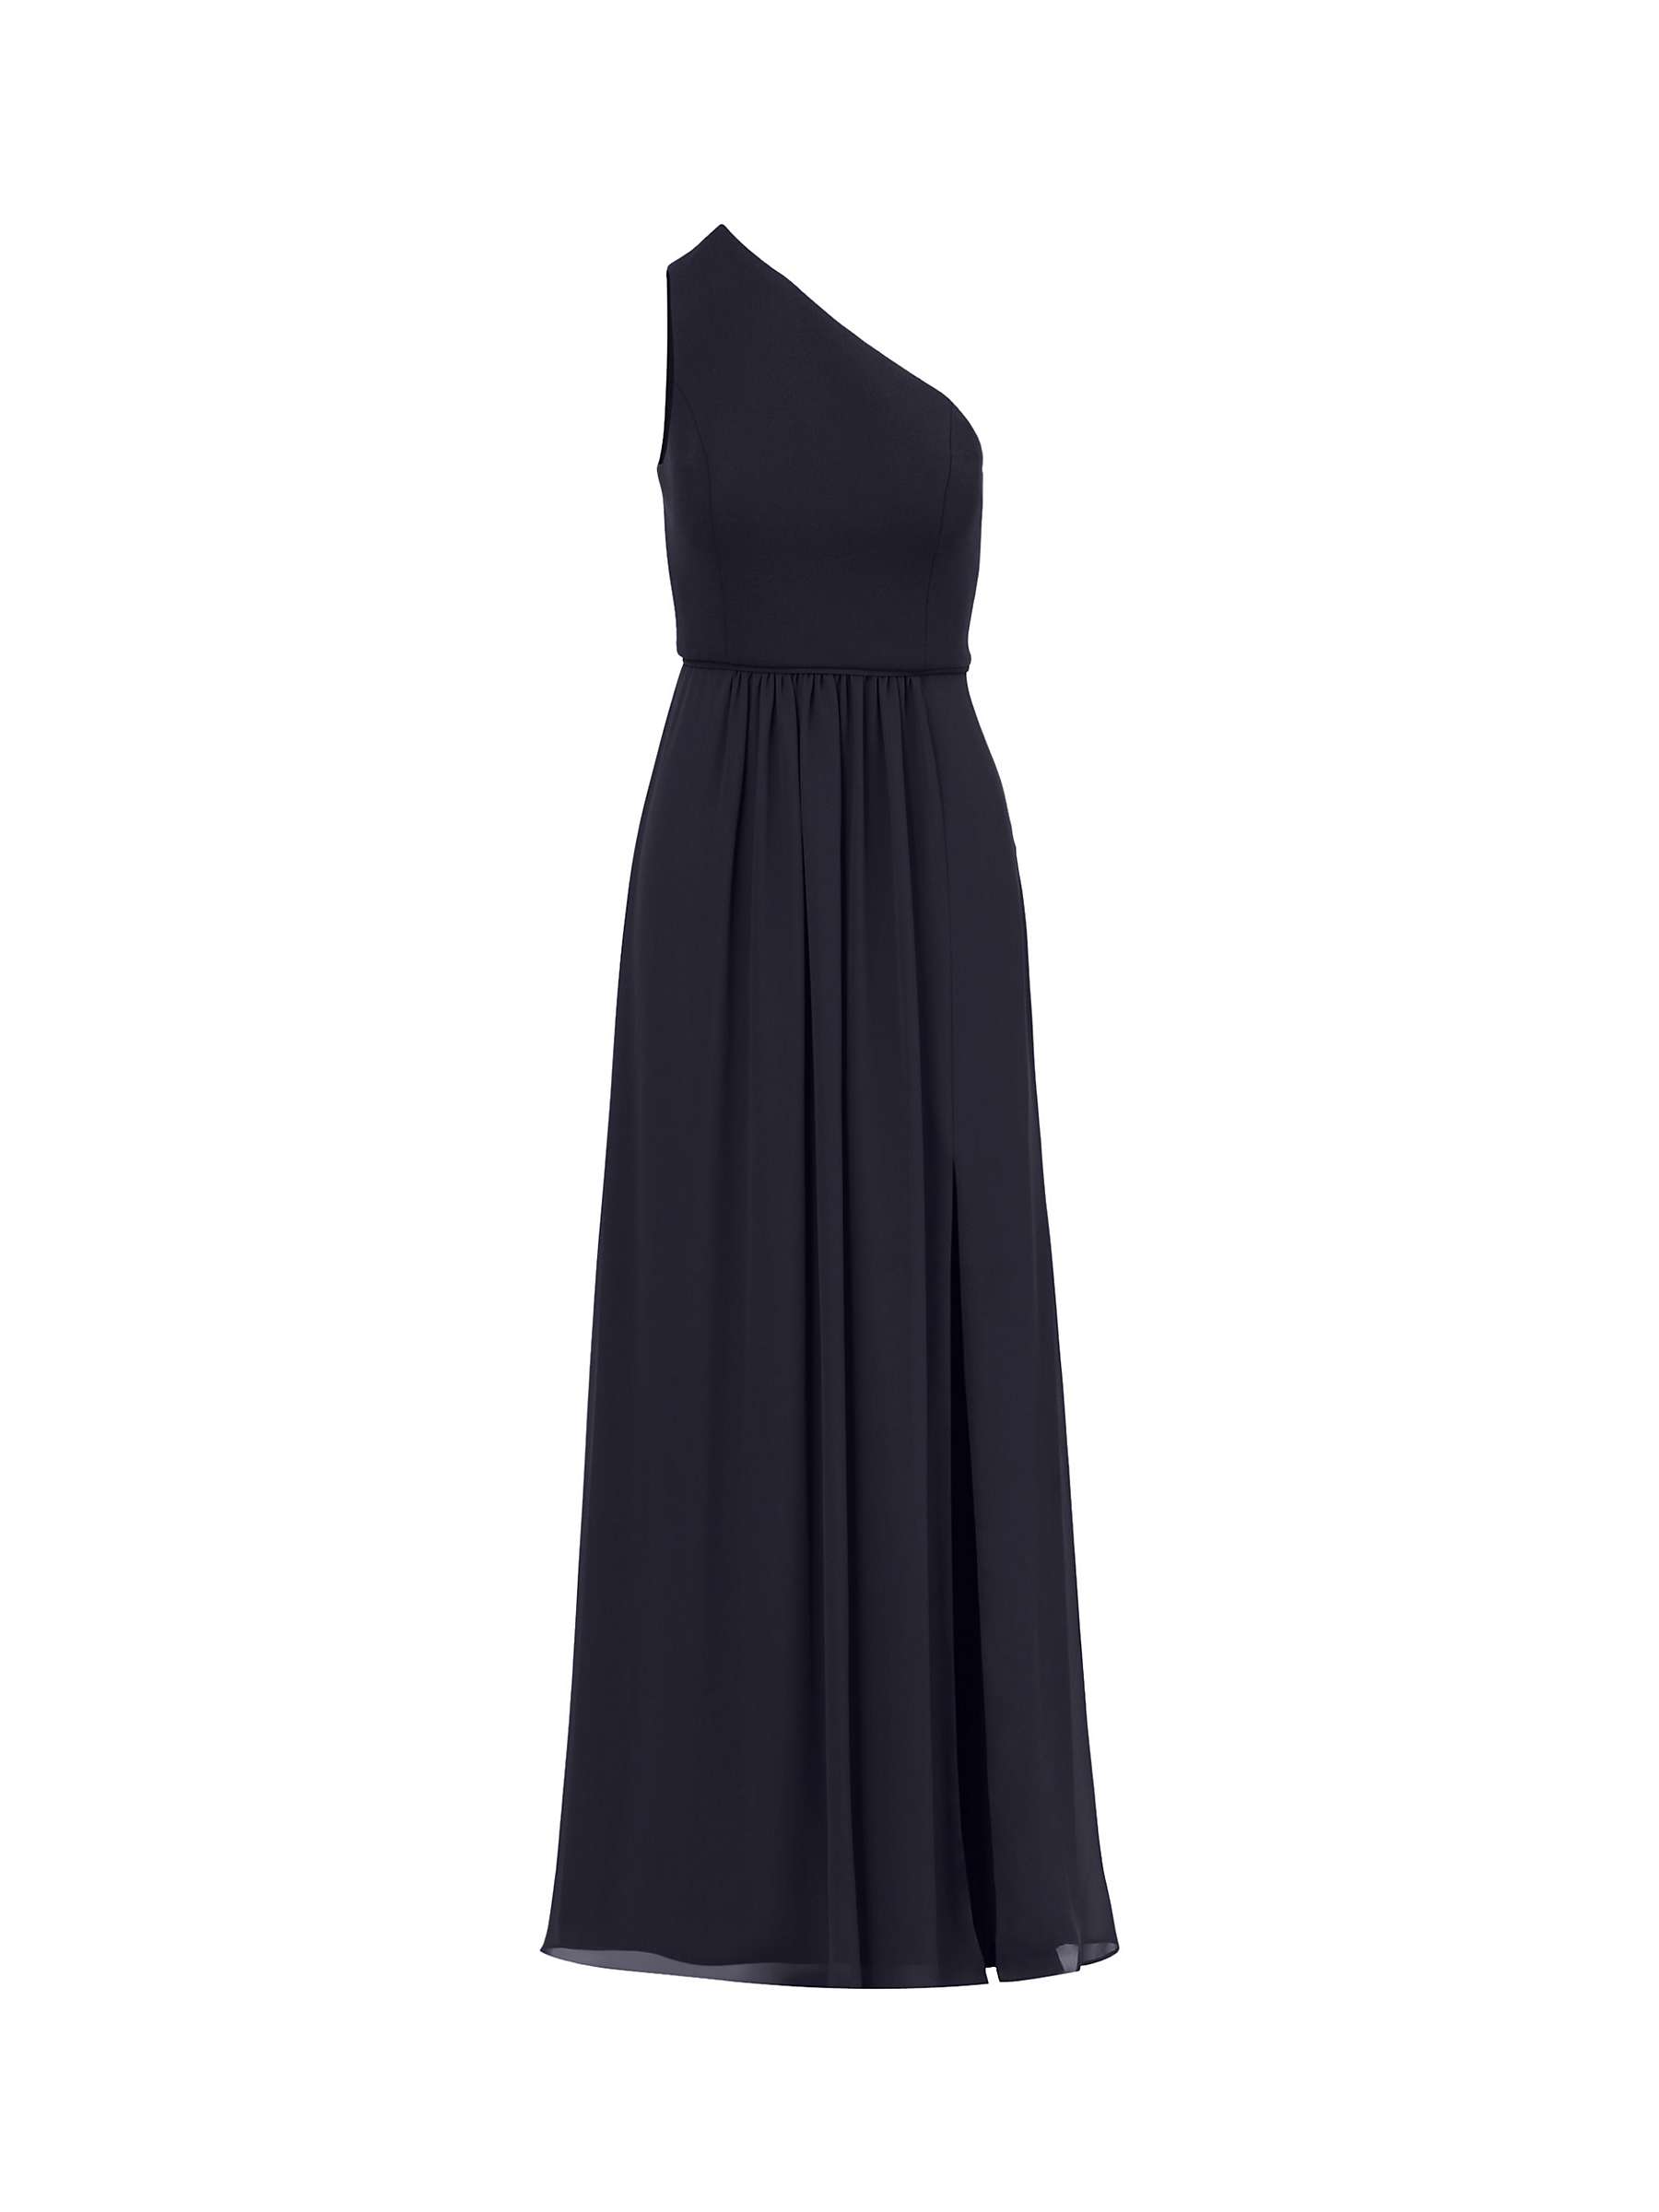 Adrianna Papell One Shoulder Chiffon Gown, Midnight at John Lewis ...